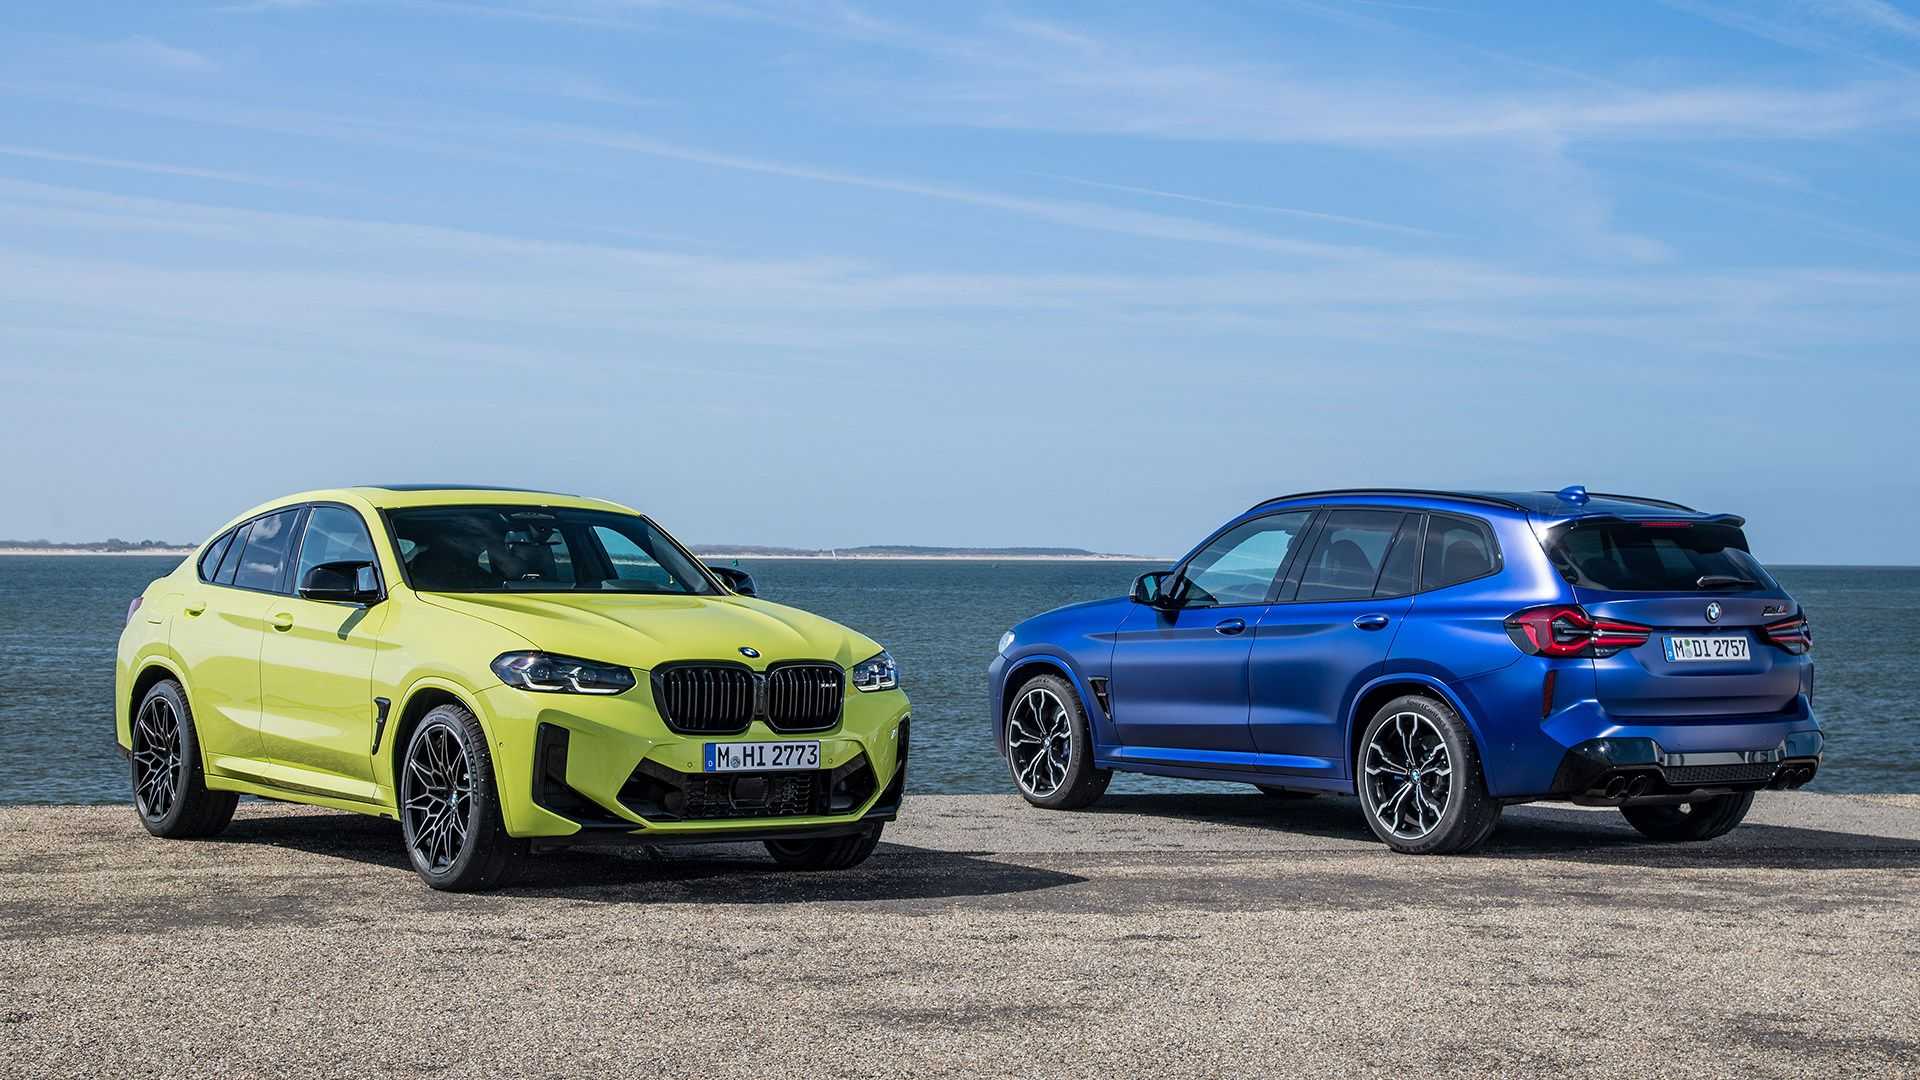 2022 BMW X3 And X4 Debut Refreshed Exteriors, Tweaked Interiors